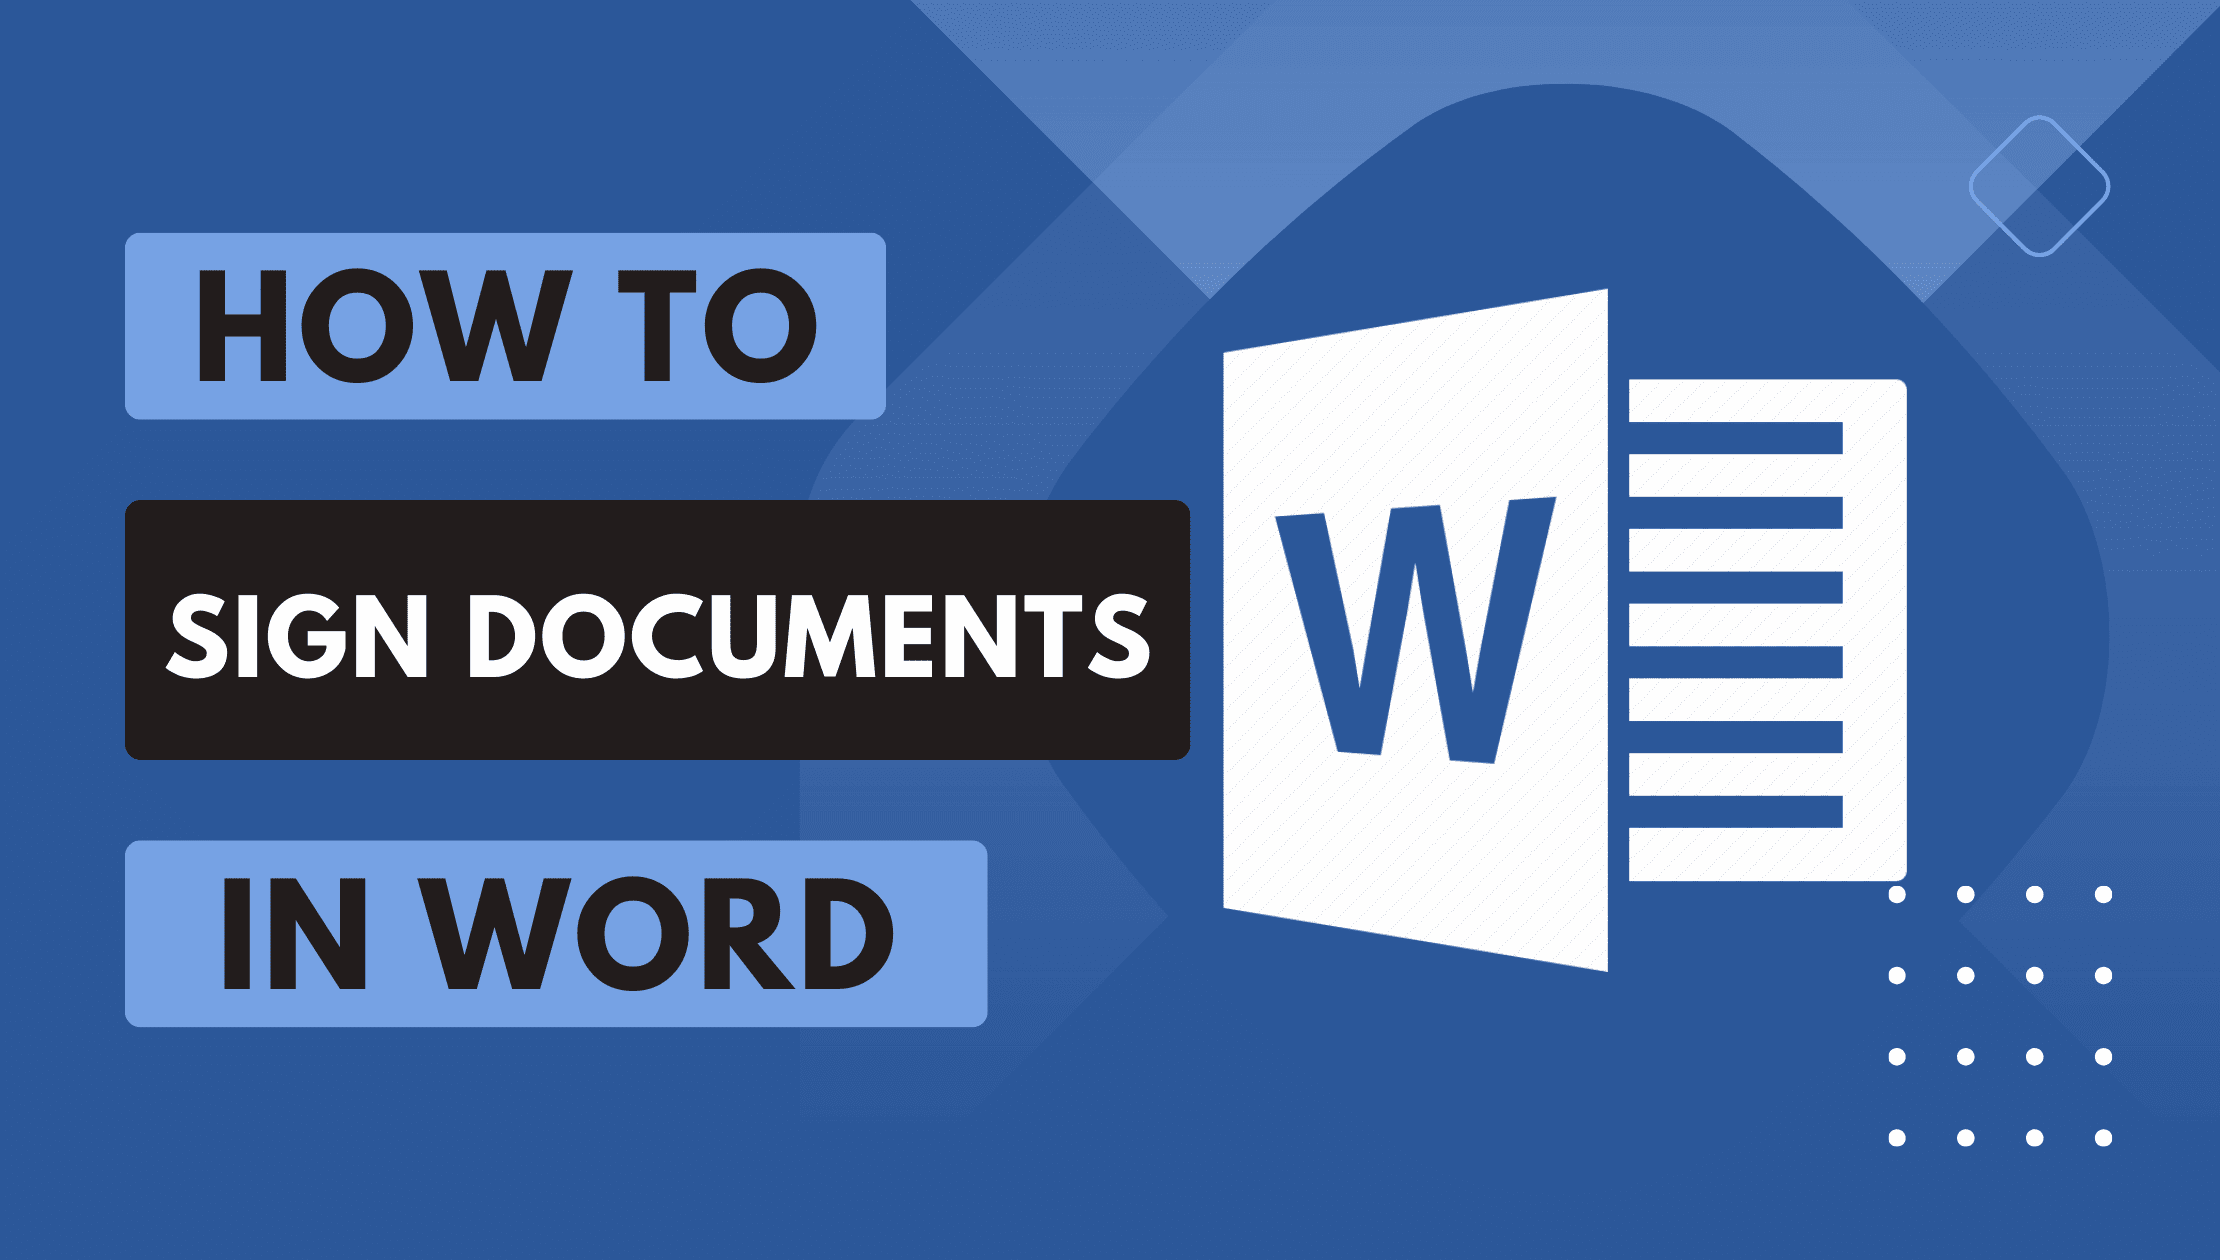 5 Simple Steps to Sign Documents in Microsoft Word